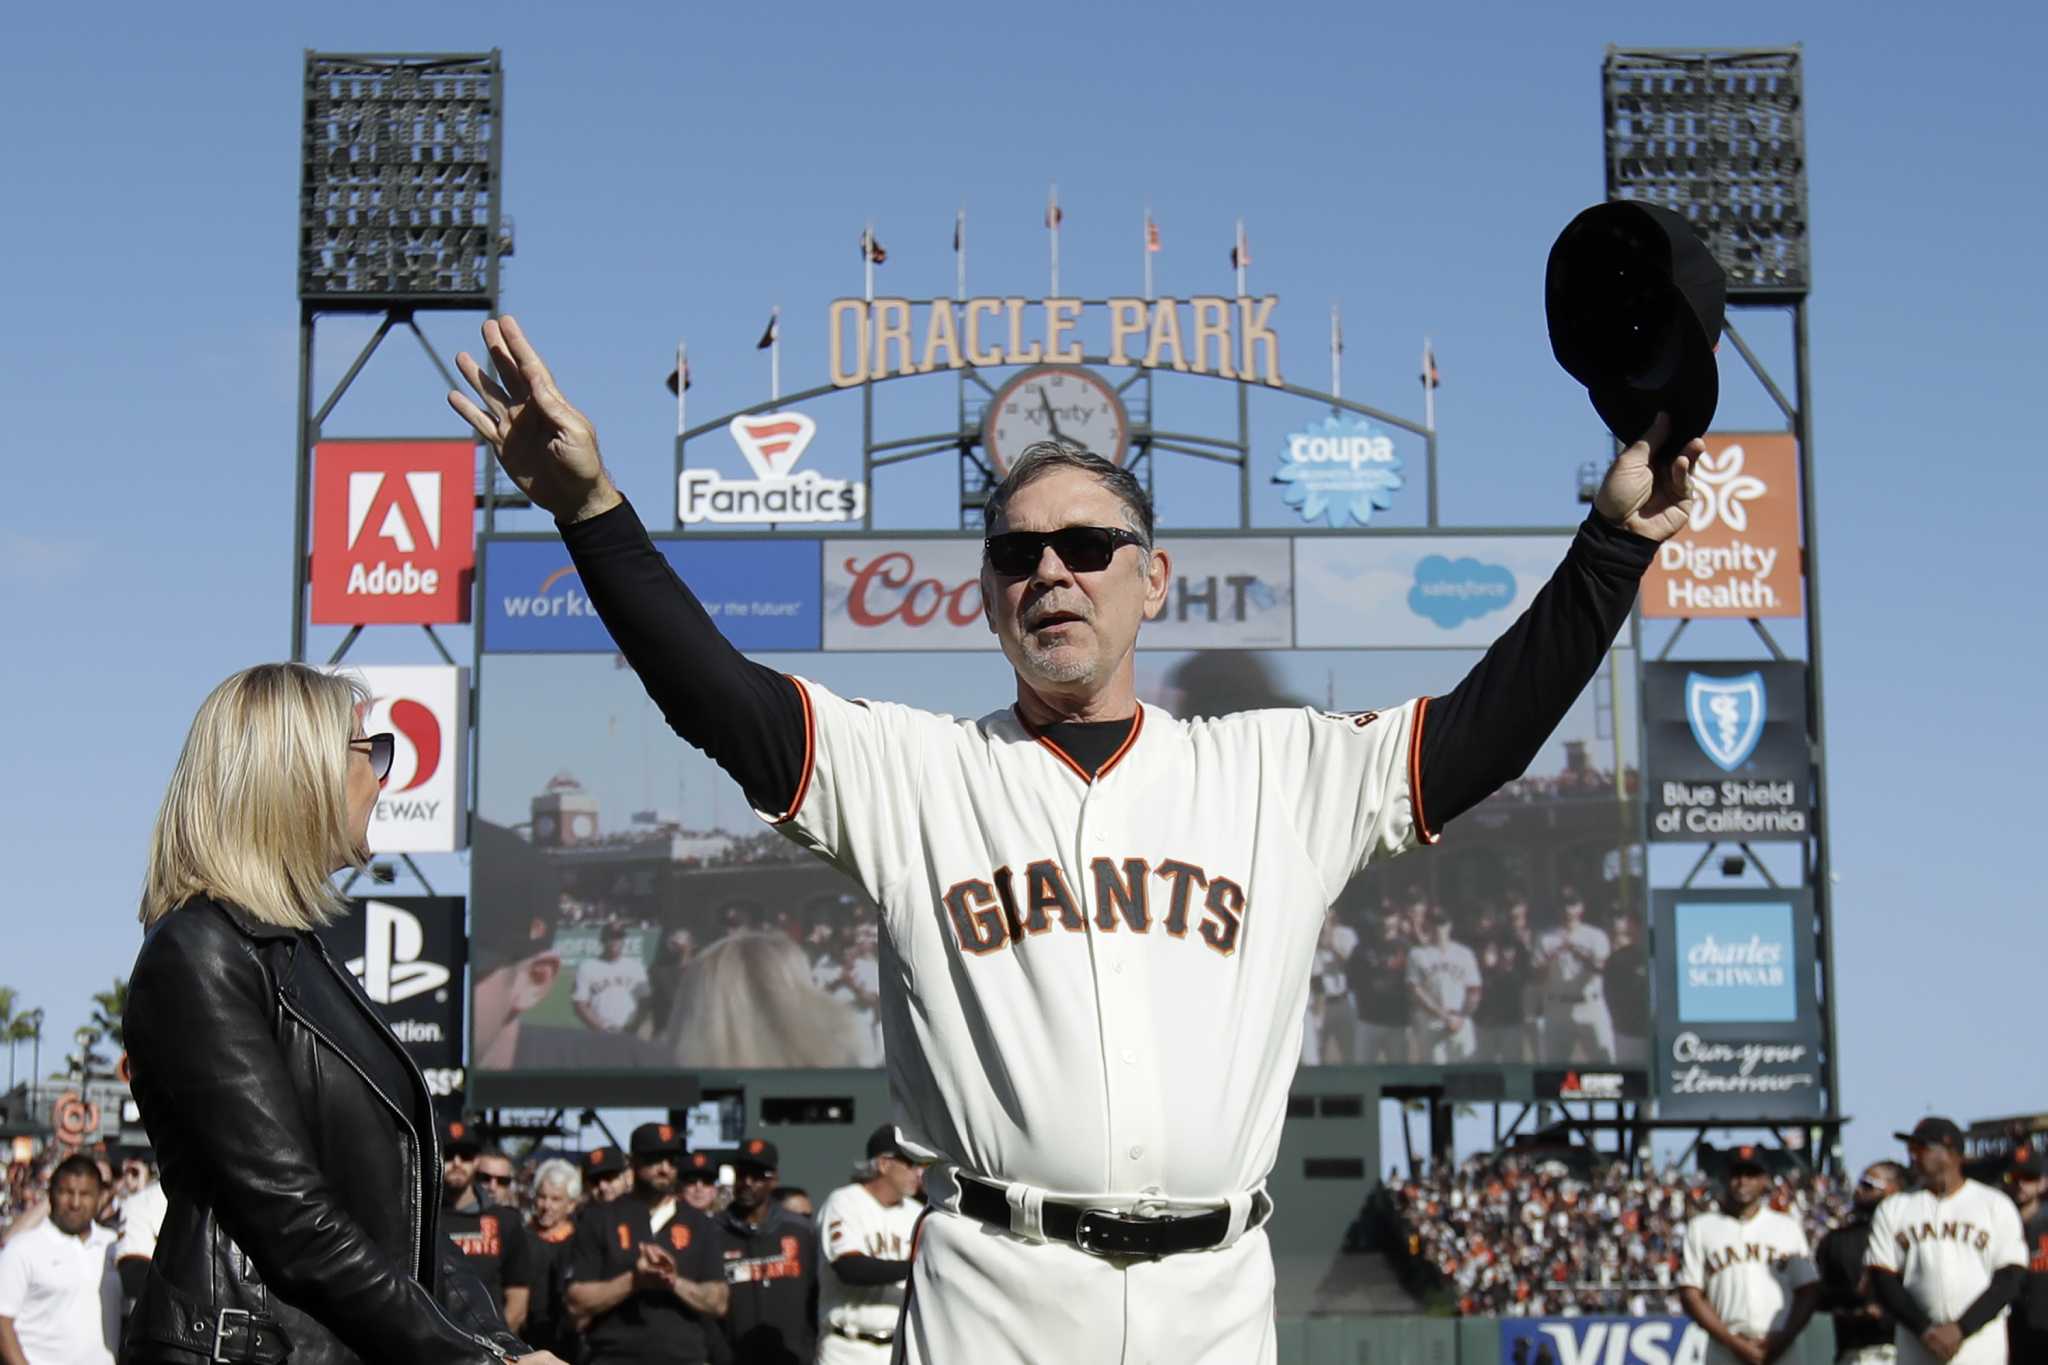 San Francisco Giants manager Bruce Bochy says he's retiring from